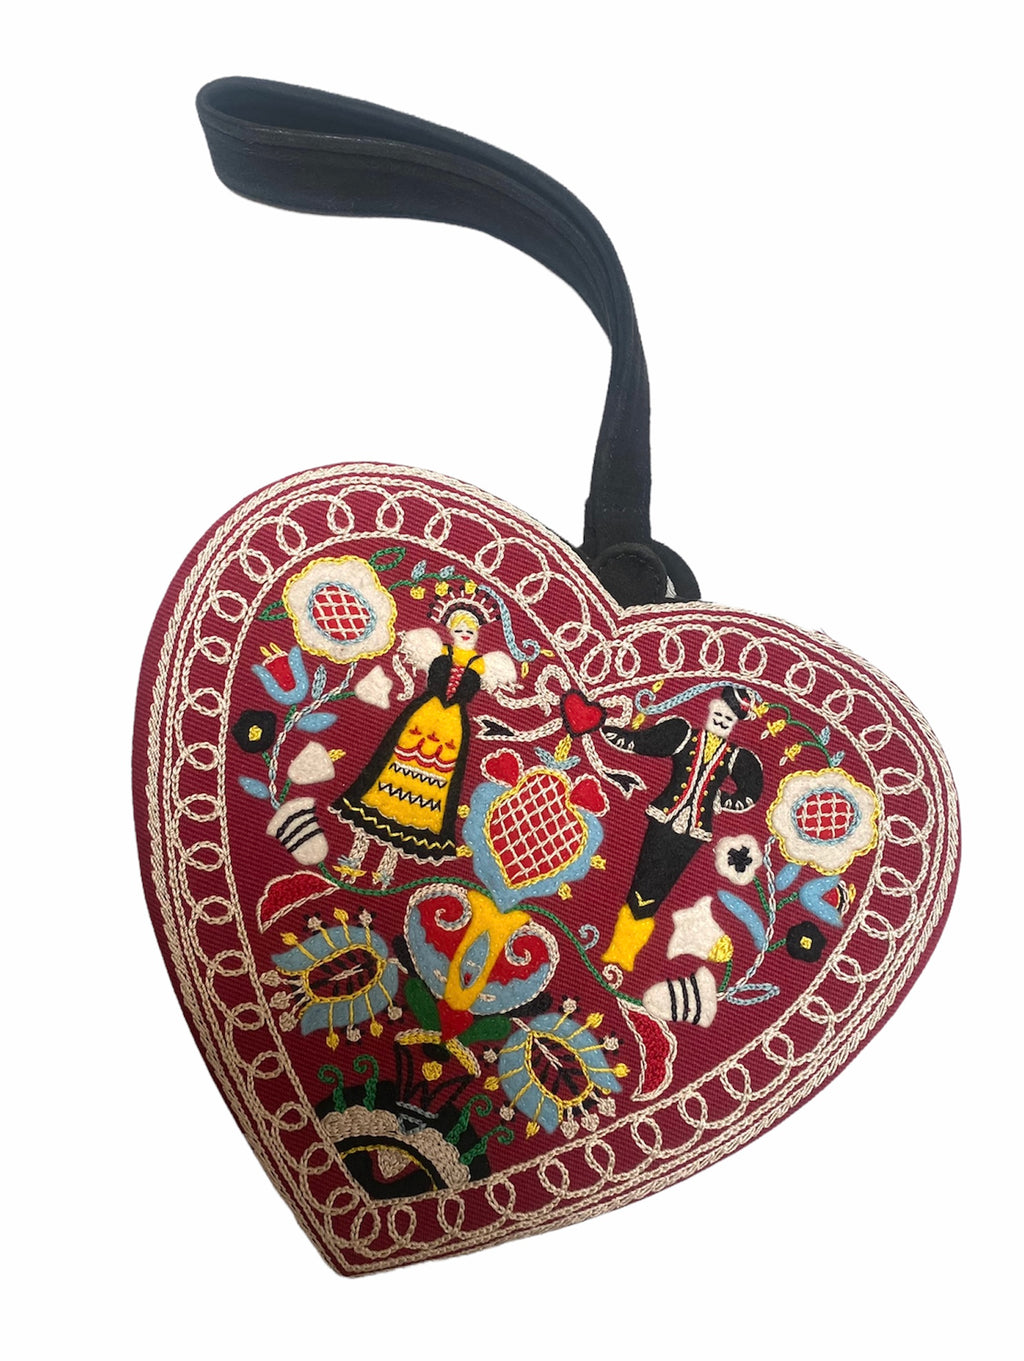 Olympia Le Tan Heart Shaped Embroidered Purse  FRONT 1 of 4